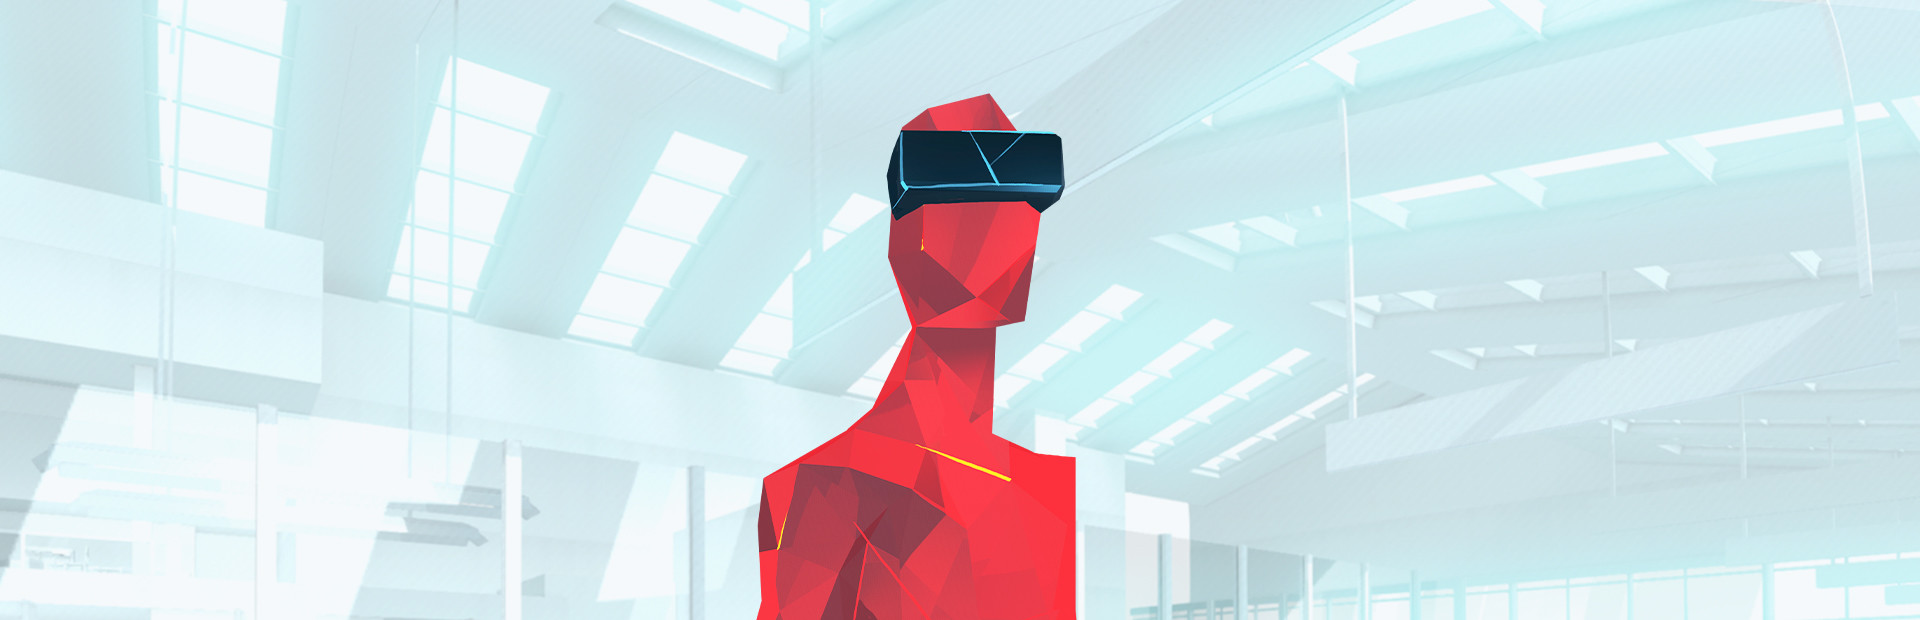 SUPERHOT VR cover image